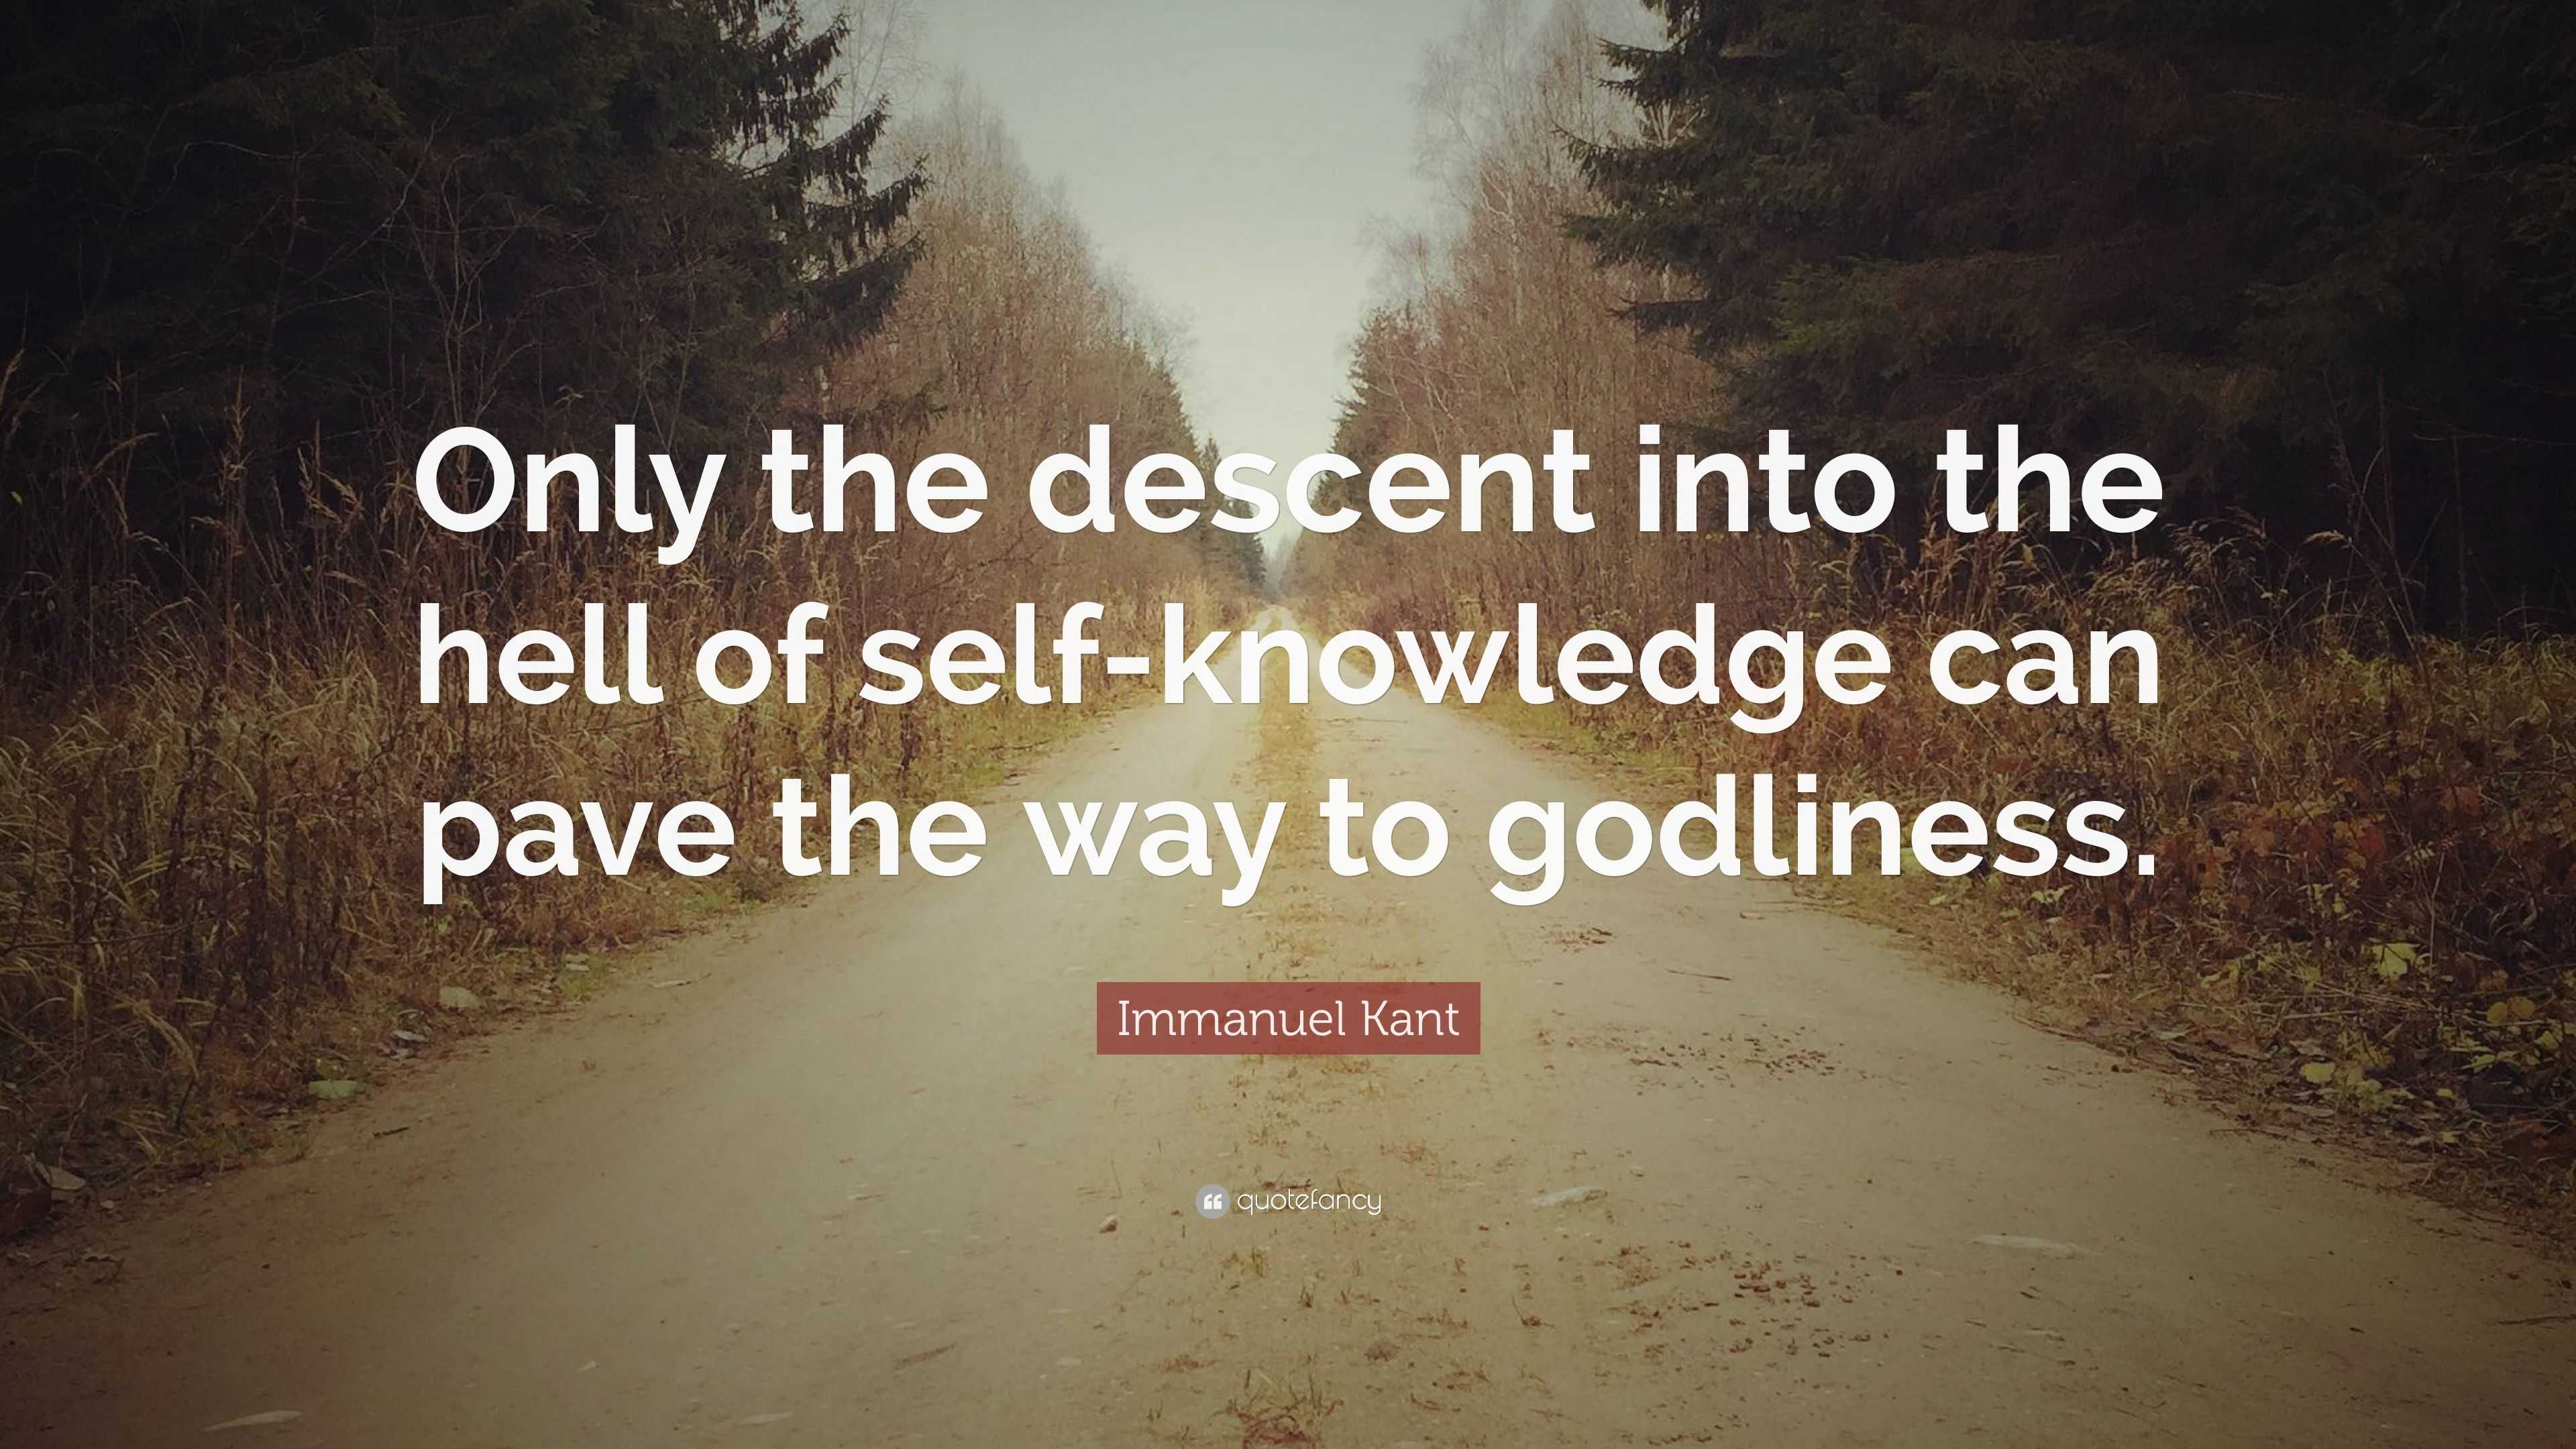 Immanuel Kant Quote: “Only the descent into the hell of self-knowledge ...